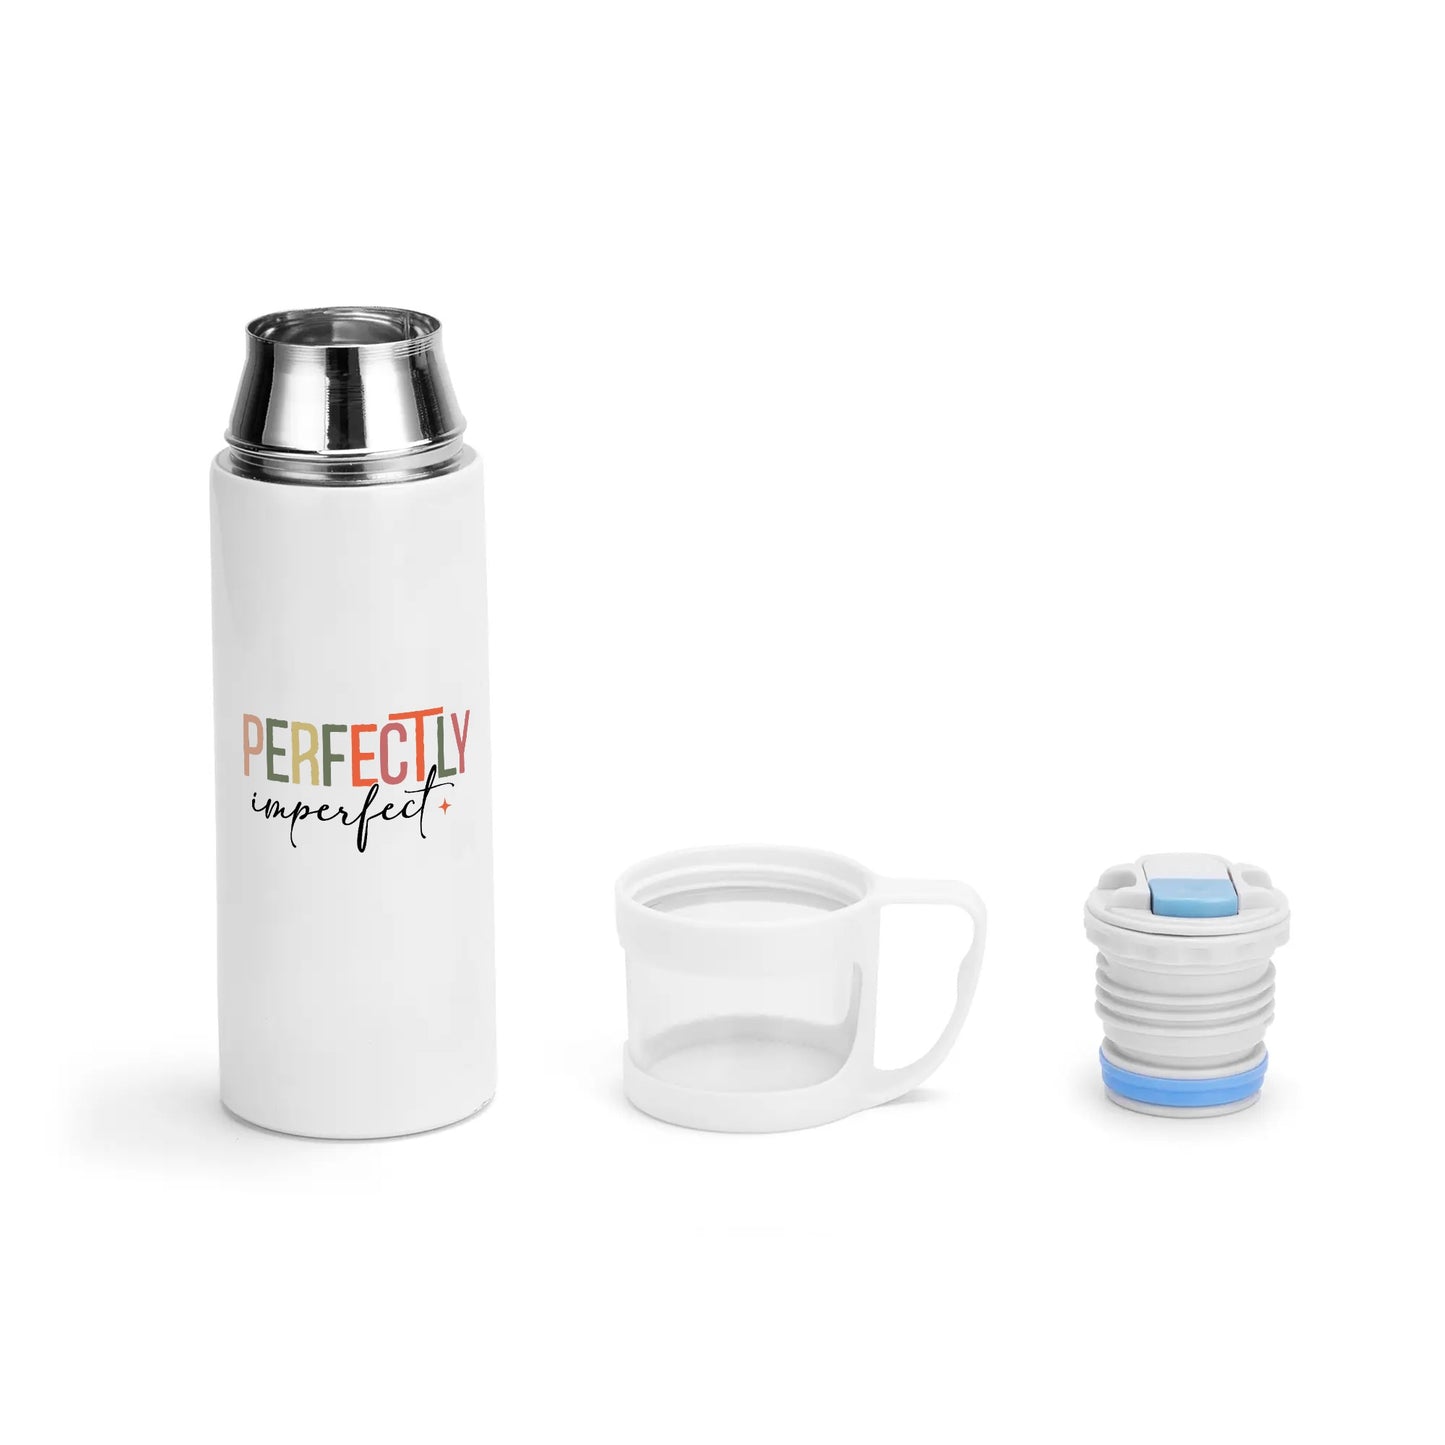 Perfectly Imperfect Christian Vacuum Bottle with Cup popcustoms